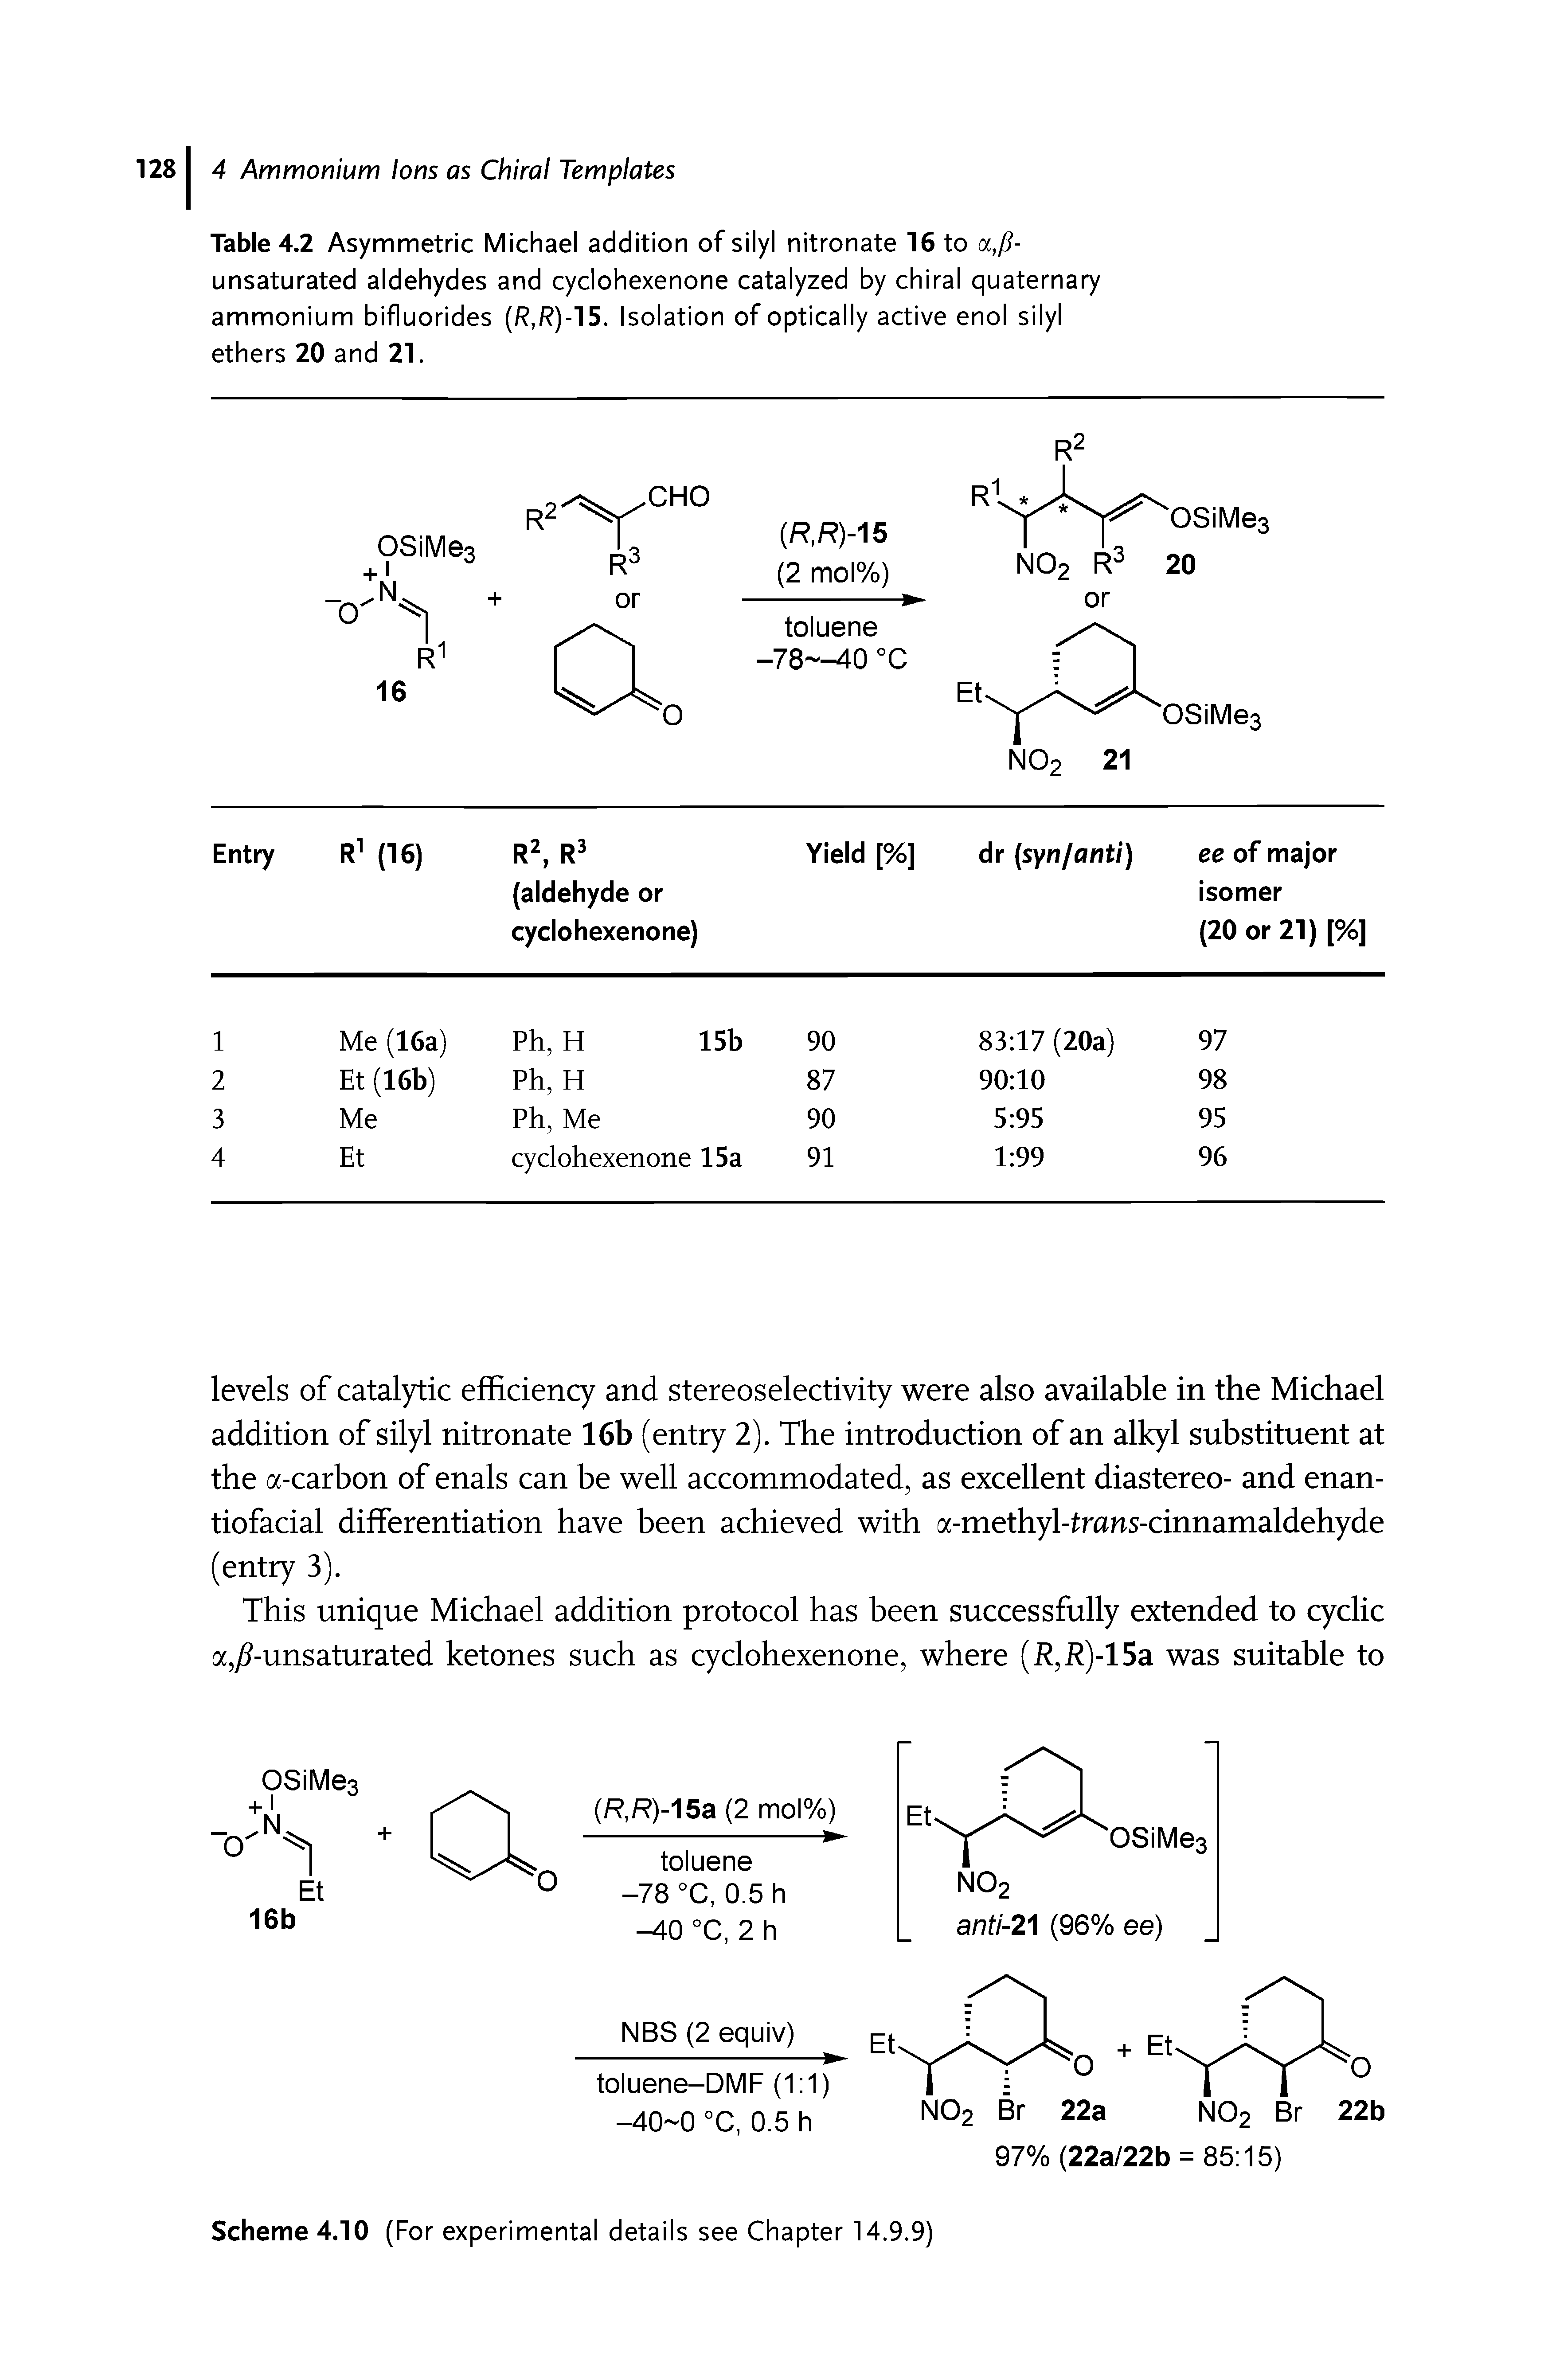 Table 4.2 Asymmetric Michael addition of silyl nitronate 16 to a,/ -unsaturated aldehydes and cyclohexenone catalyzed by chiral quaternary ammonium bifluorides (/ ,/ )-15. Isolation of optically active enol silyl ethers 20 and 21.